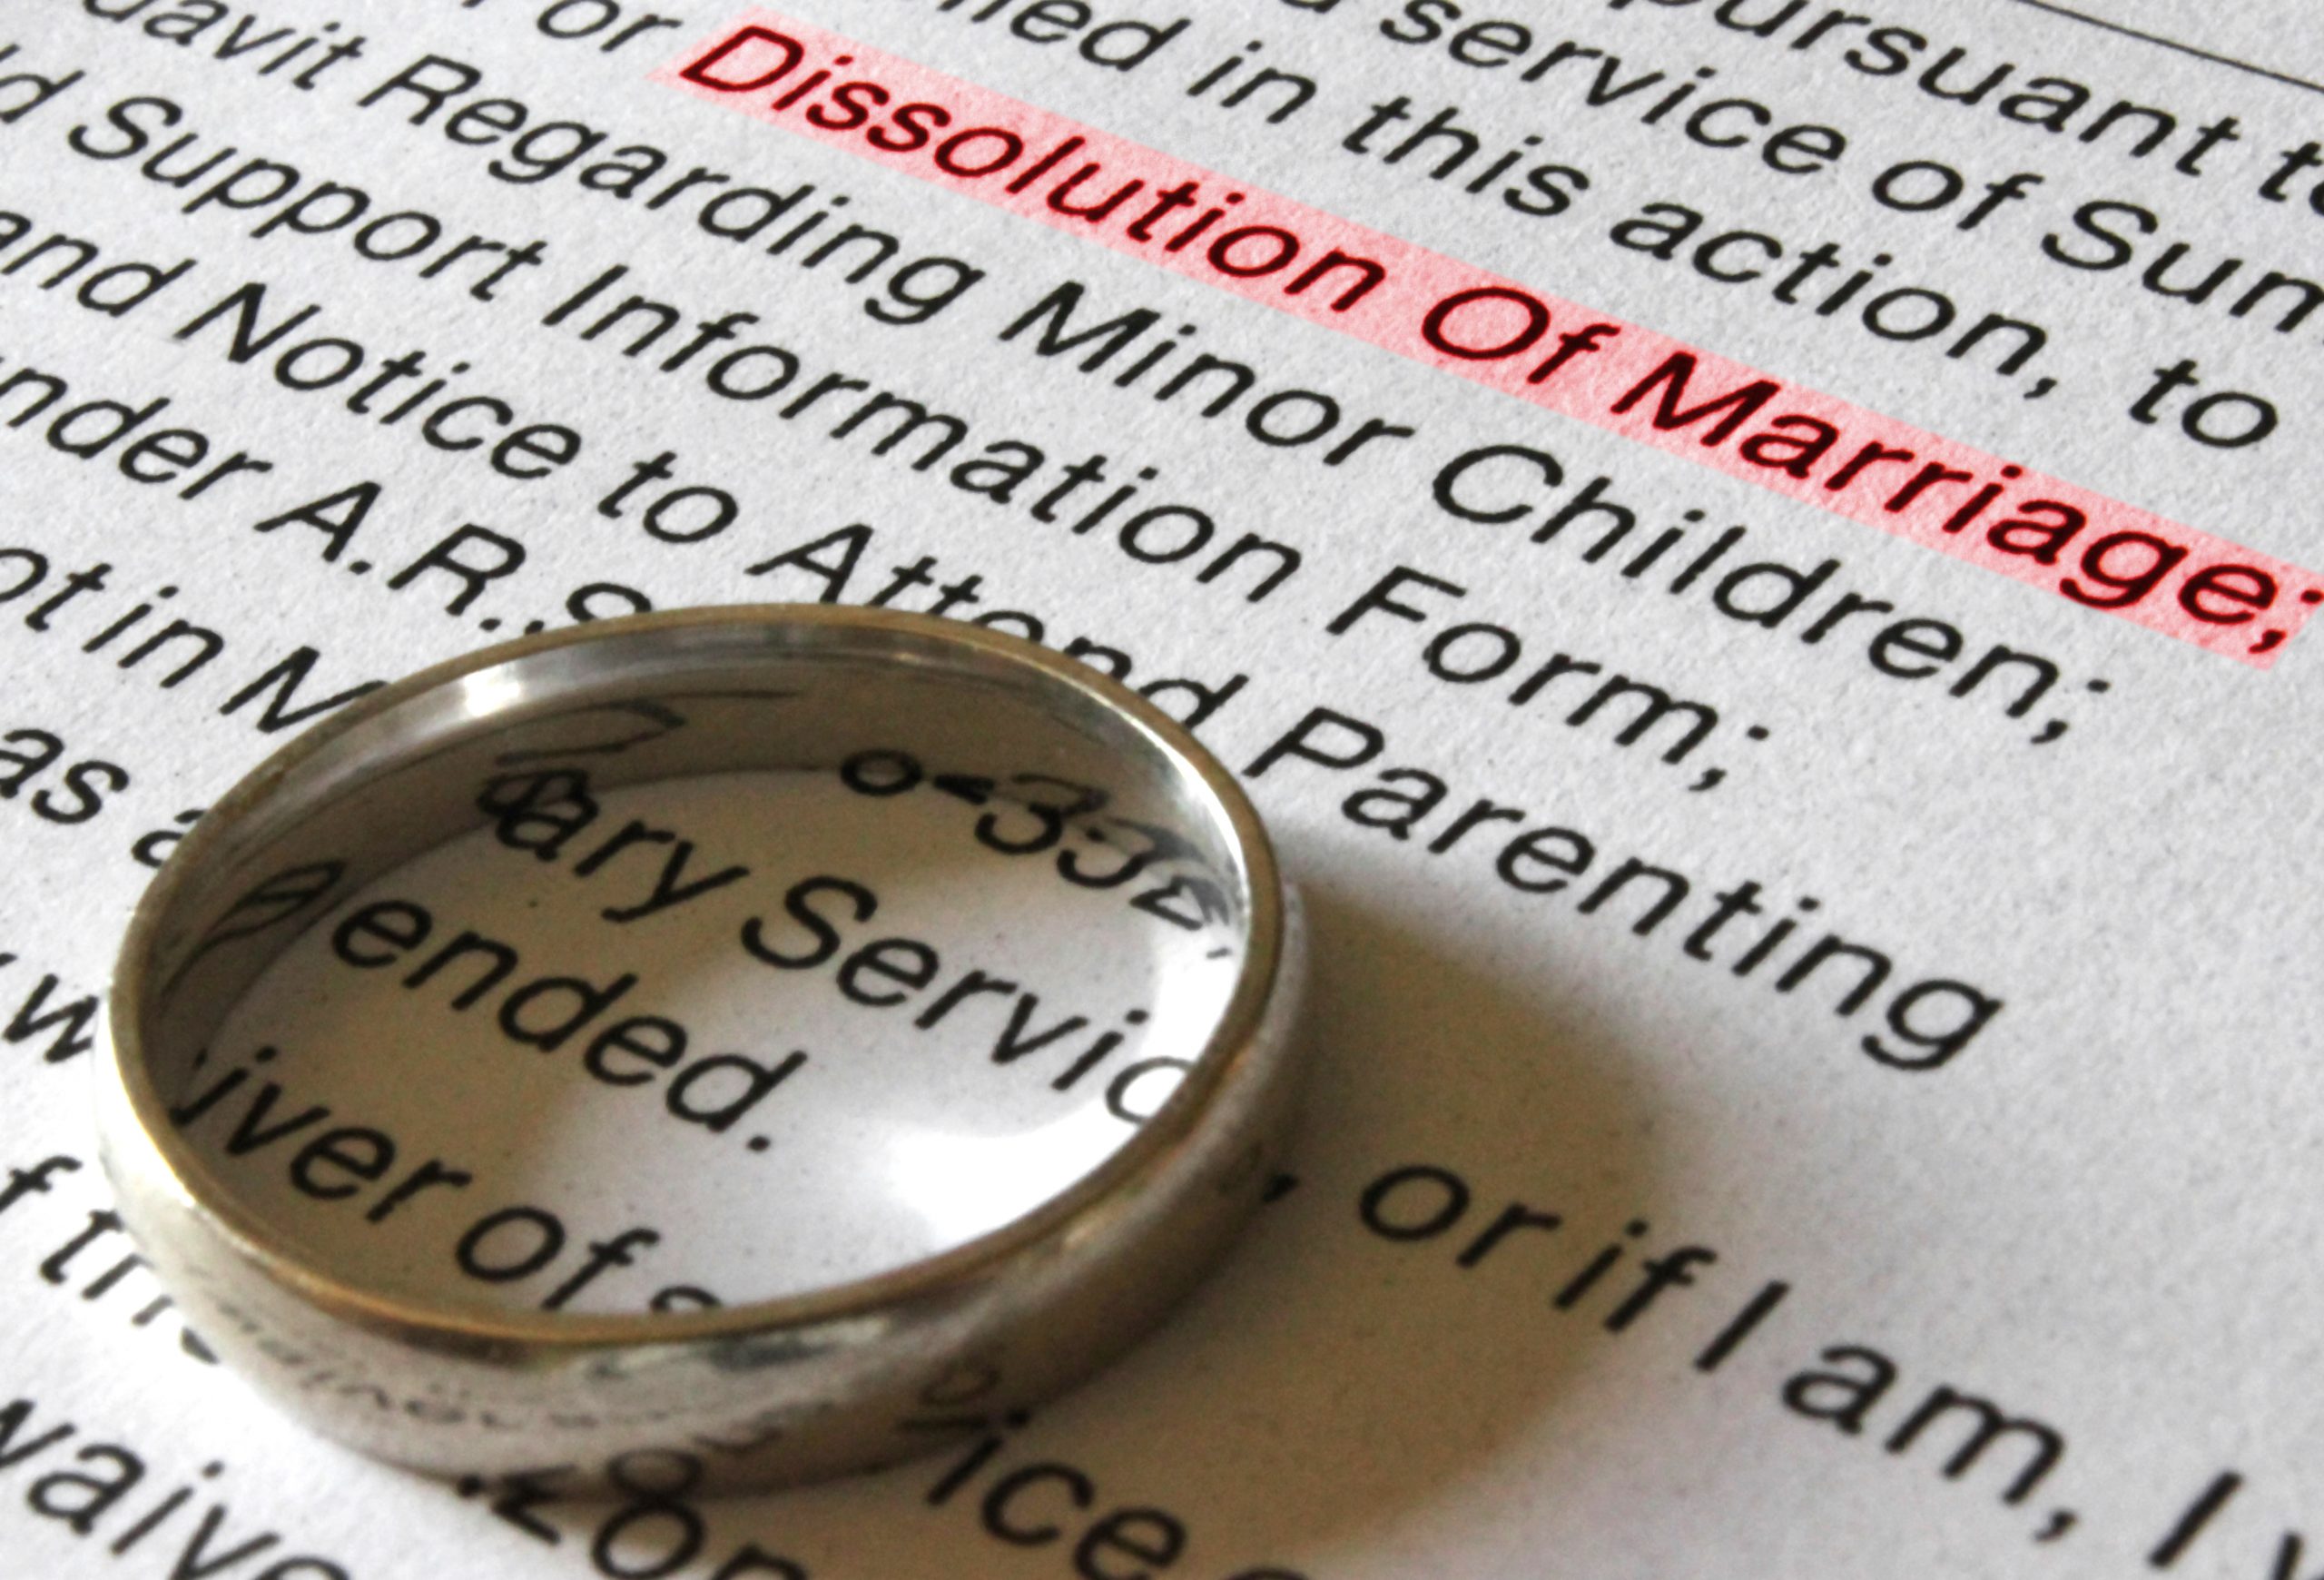 A Divorce Petition and White Gold Wedding Band